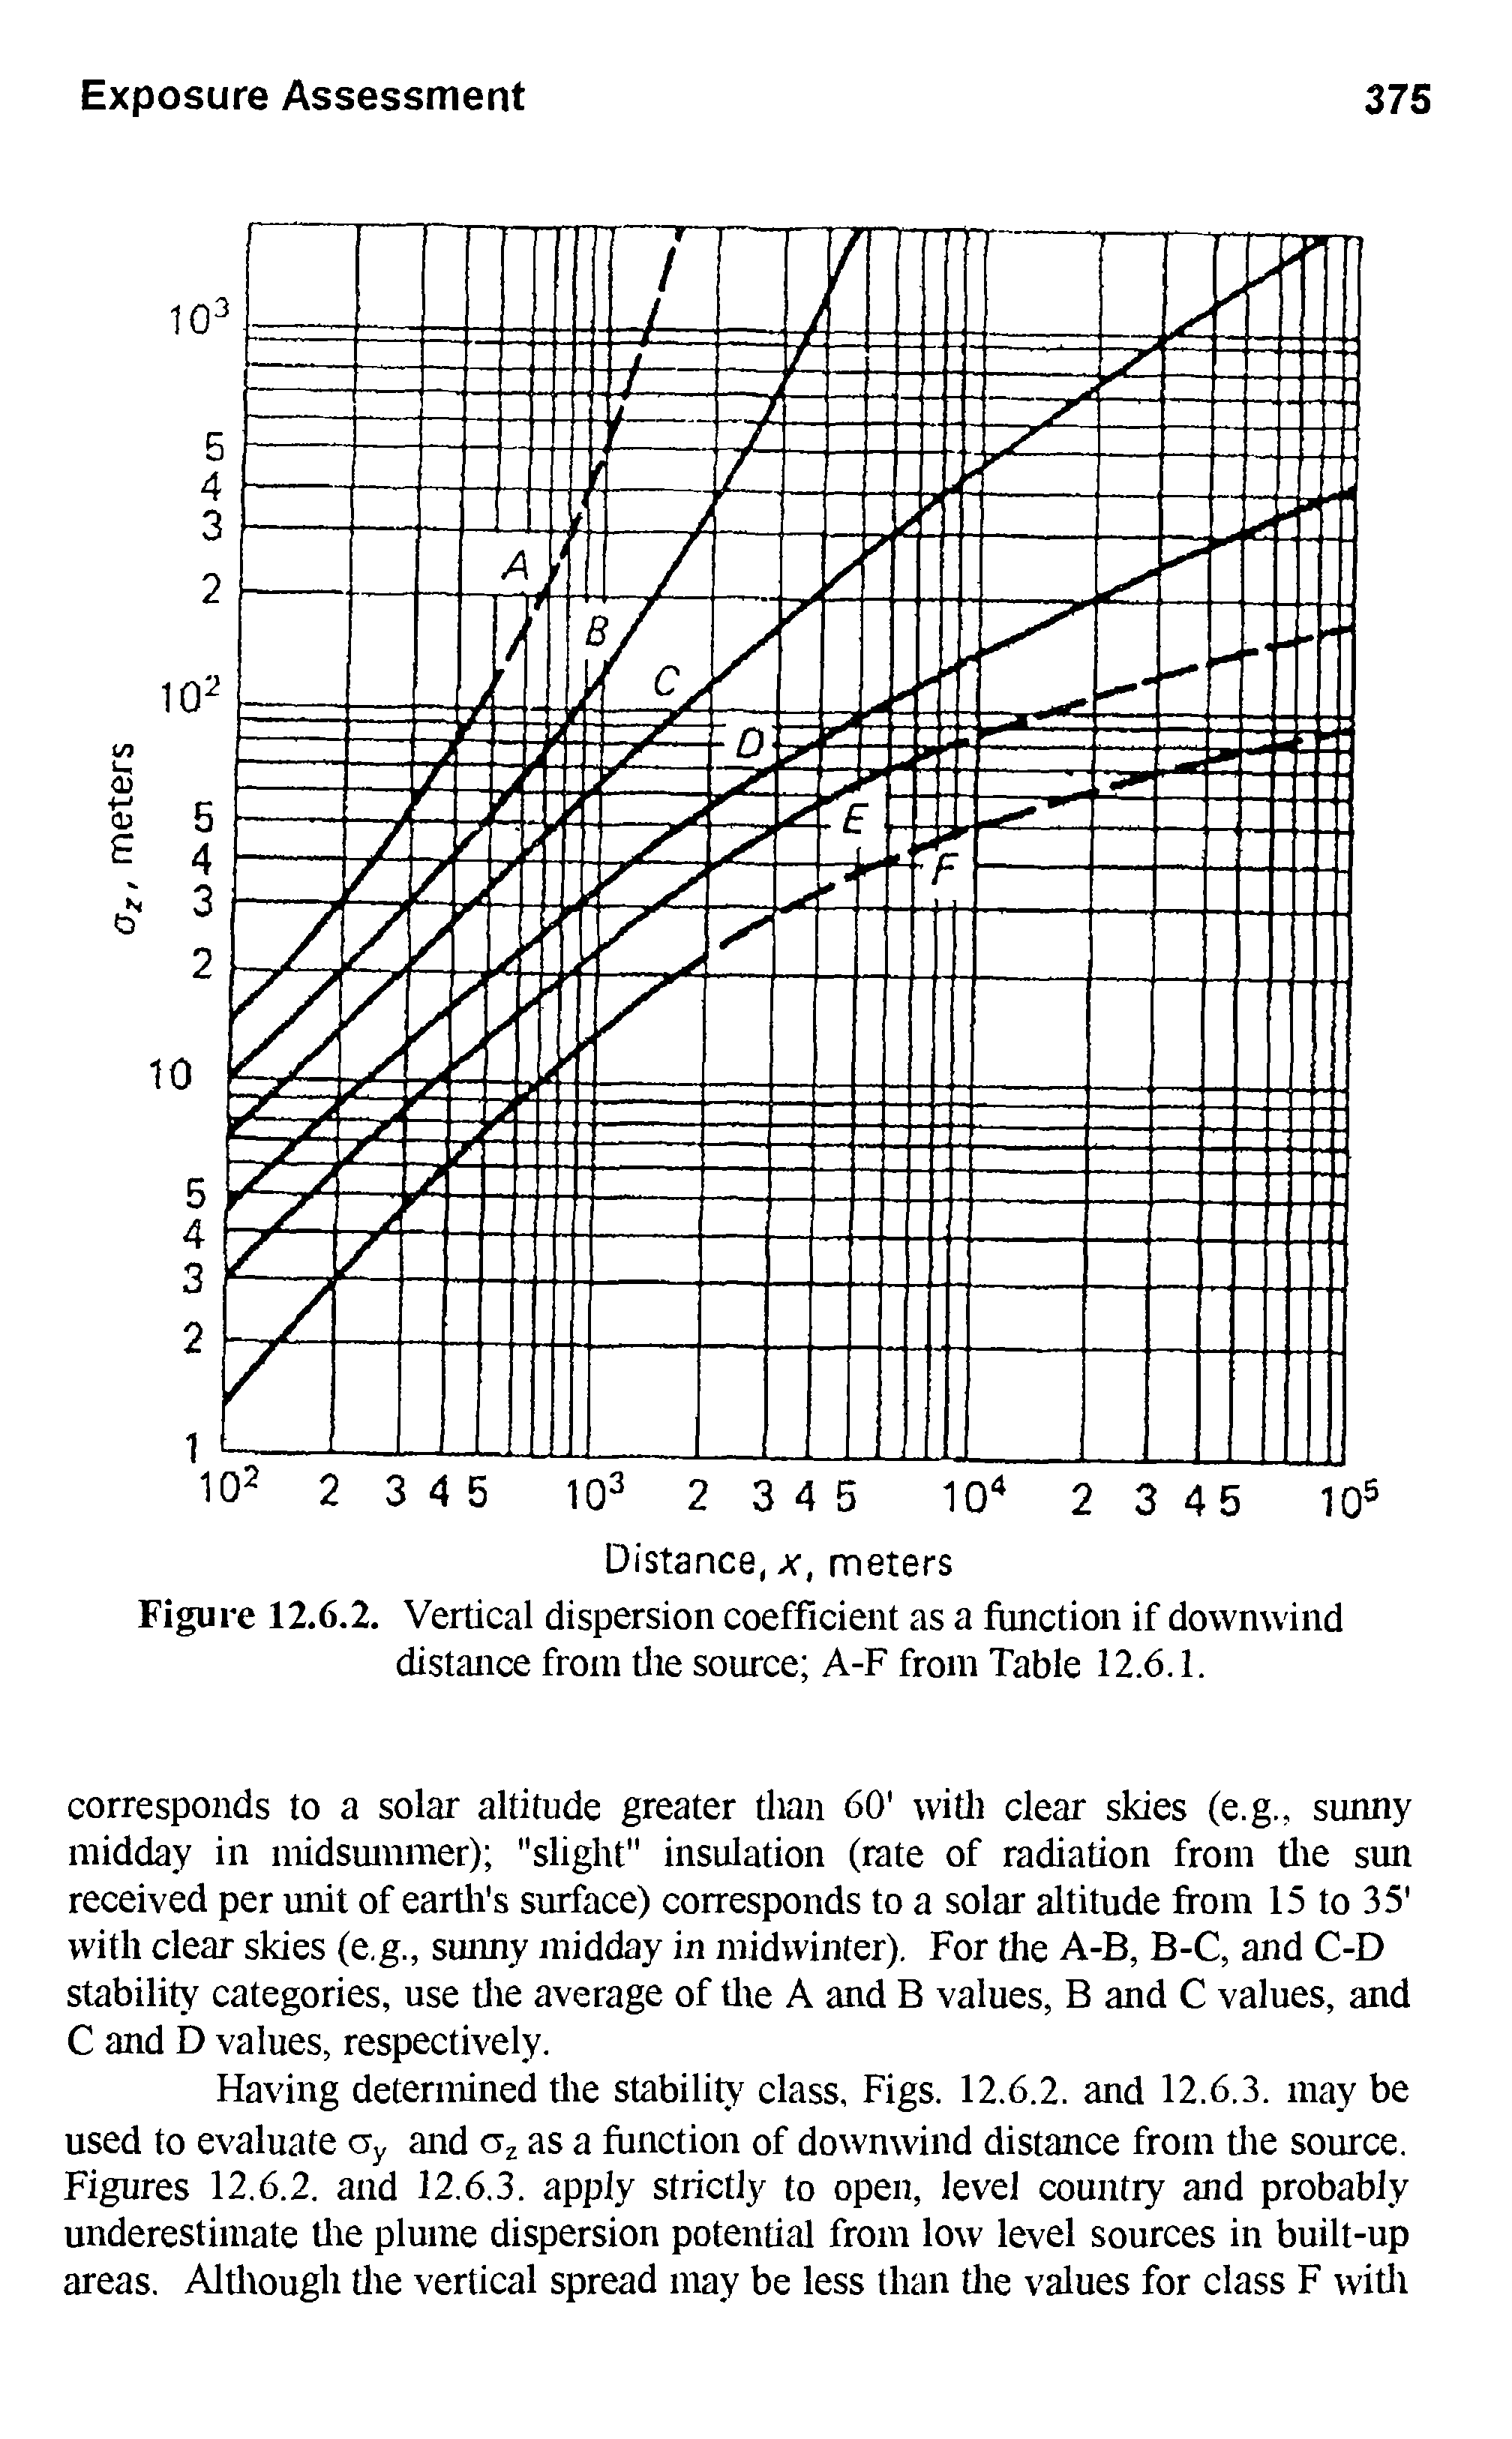 Figure 12.6.2. Vertical dispersion coefficient as a function if downwind distance from tlie source A-F from Table 12.6.1.